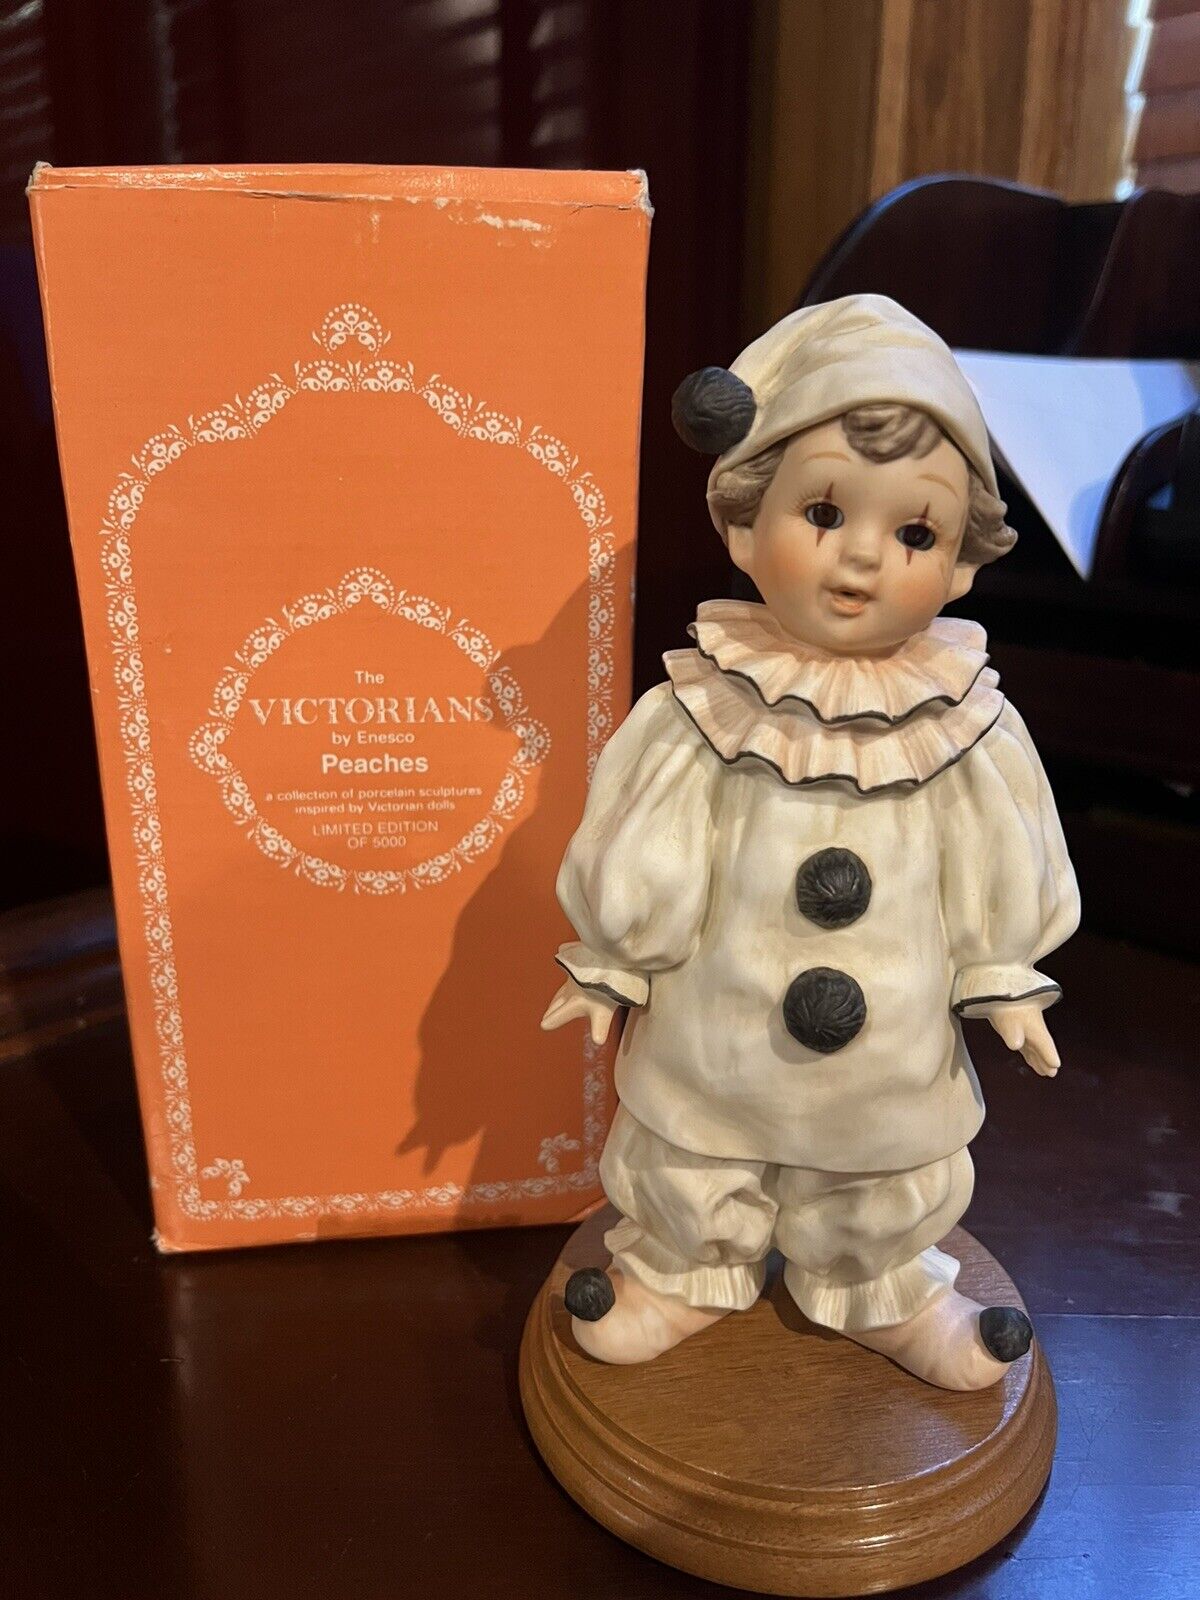 1983 The Victorians by Enesco Peaches Porcelain Figurine Limited Edition